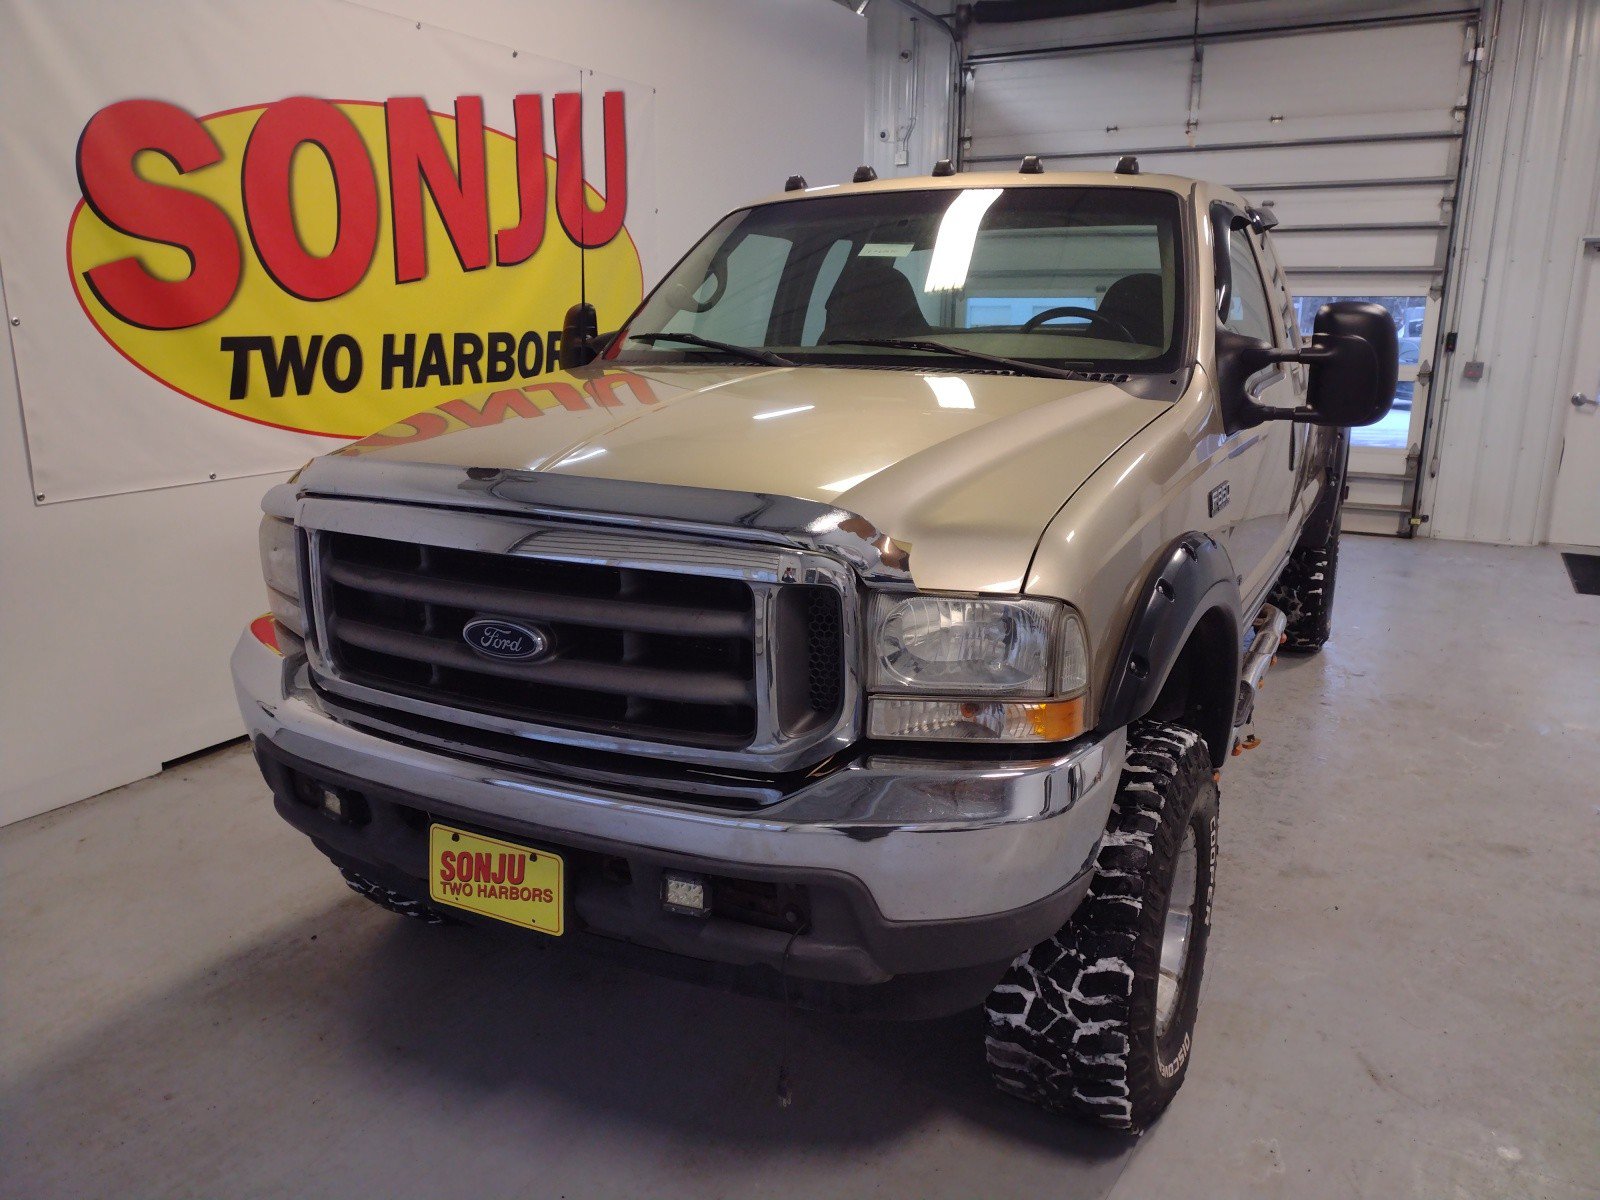 Used 2000 Ford F-350 Super Duty XL with VIN 1FTSX31F3YEA62600 for sale in Two Harbors, Minnesota